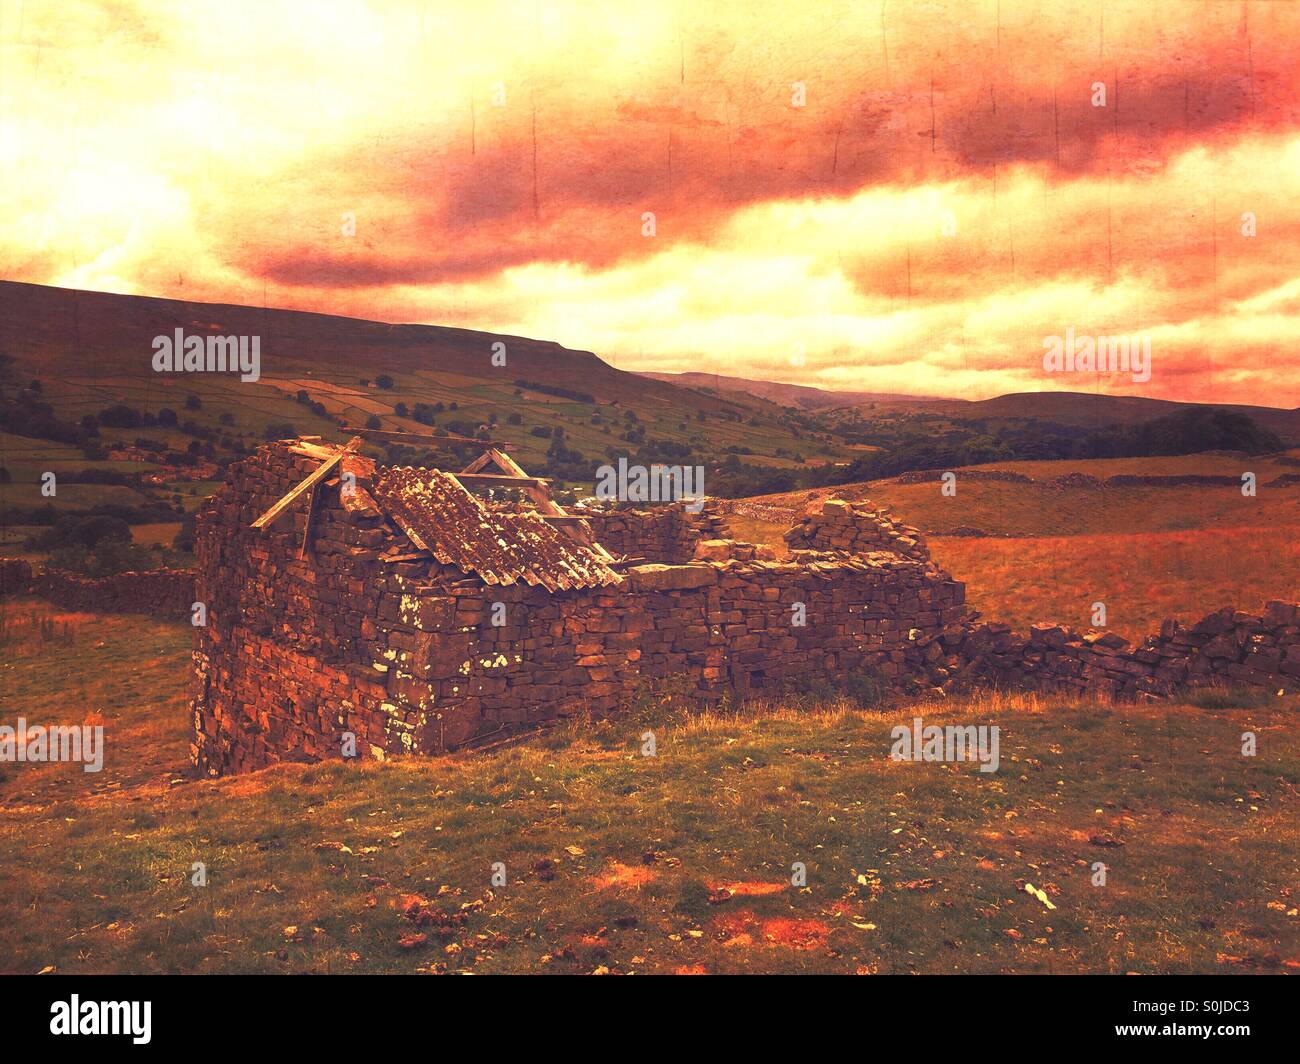 Ruins on a hillside, slowly falling apart a stone building Stock Photo